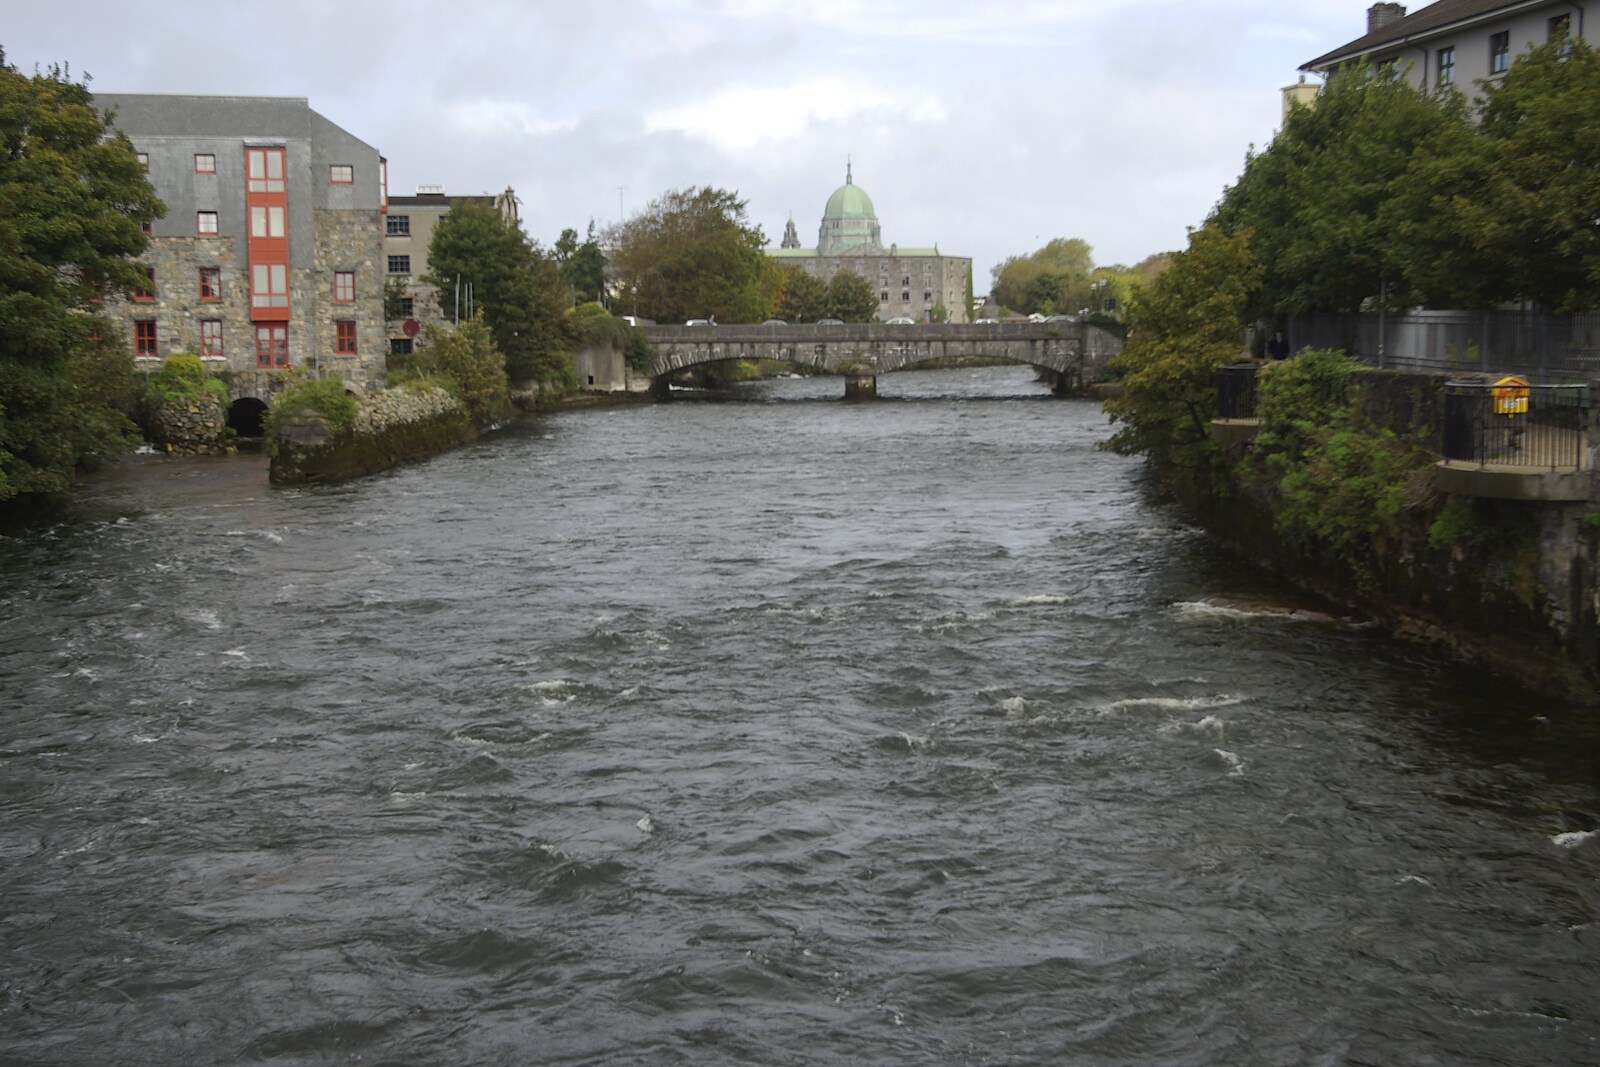 The river through Galway from Kilkee to Galway, Connacht, Ireland - 23rd September 2007